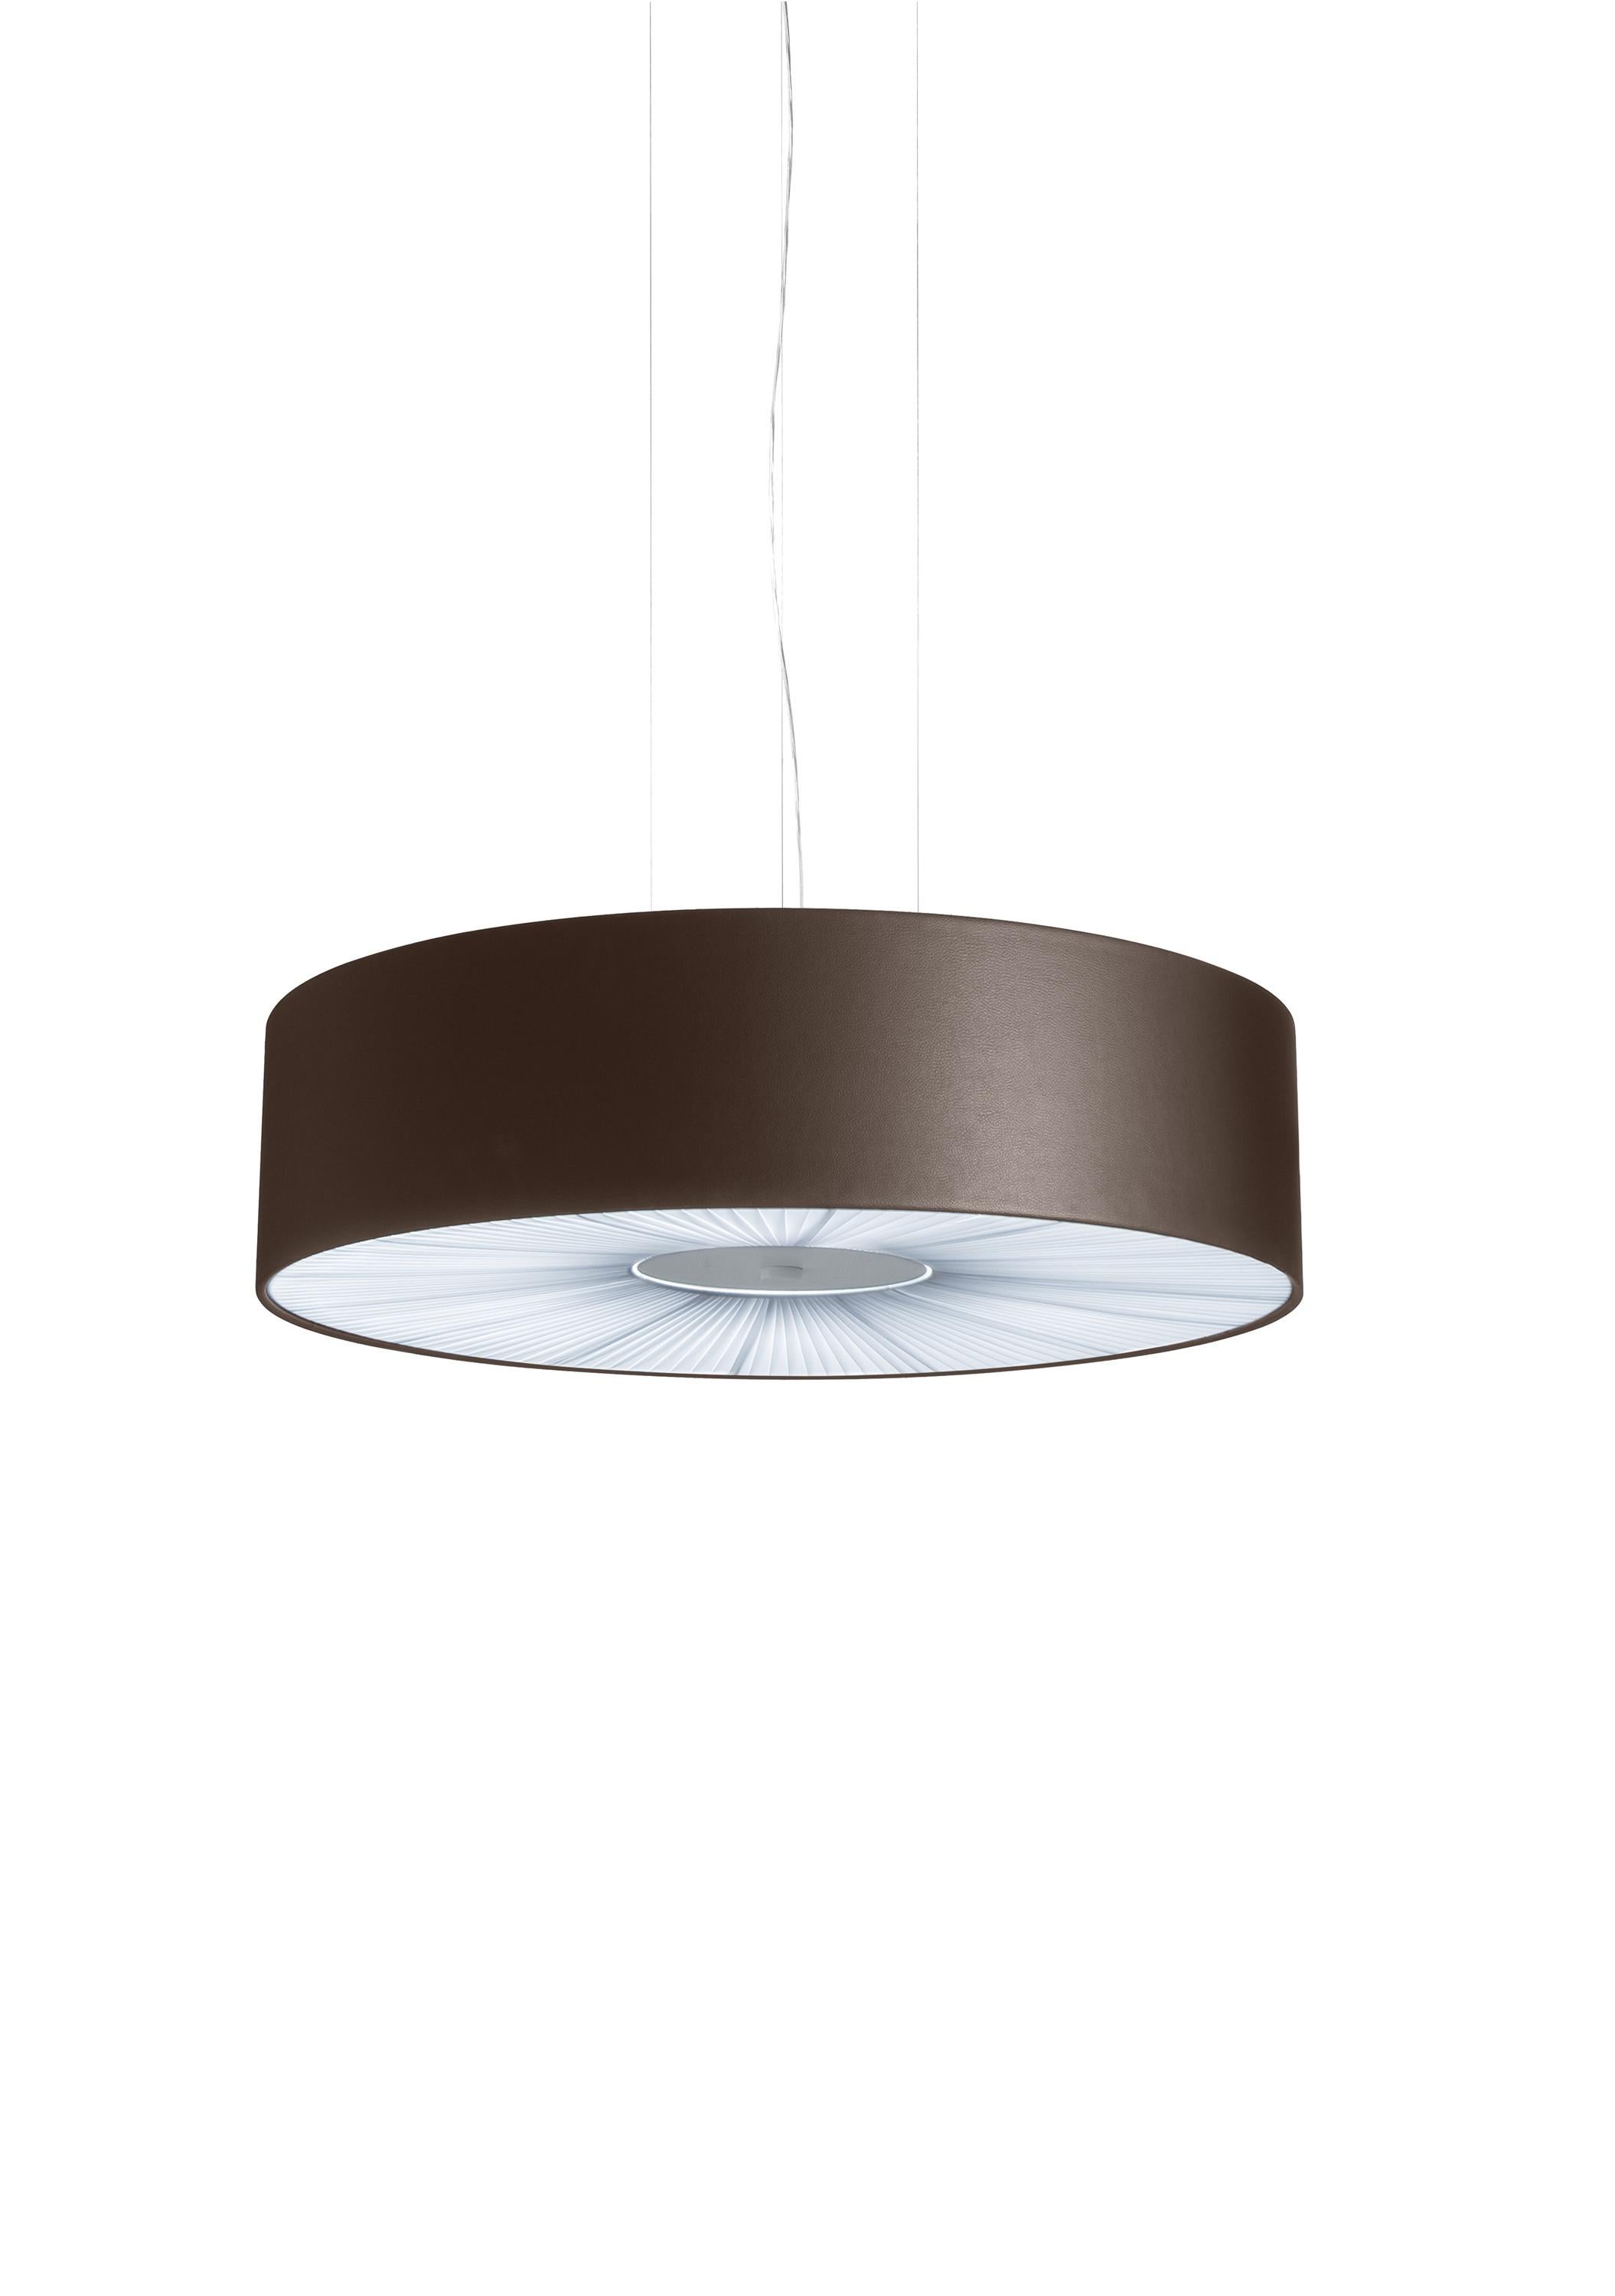 Axolight Skin Extra Large Flush Mount in Brown by Manuel Vivian

Refined rationality of perfect form. Skin reveals itself in its simplicity with multiple colors in fireproof eco-leather and different sizes, giving uniqueness and elegance to any